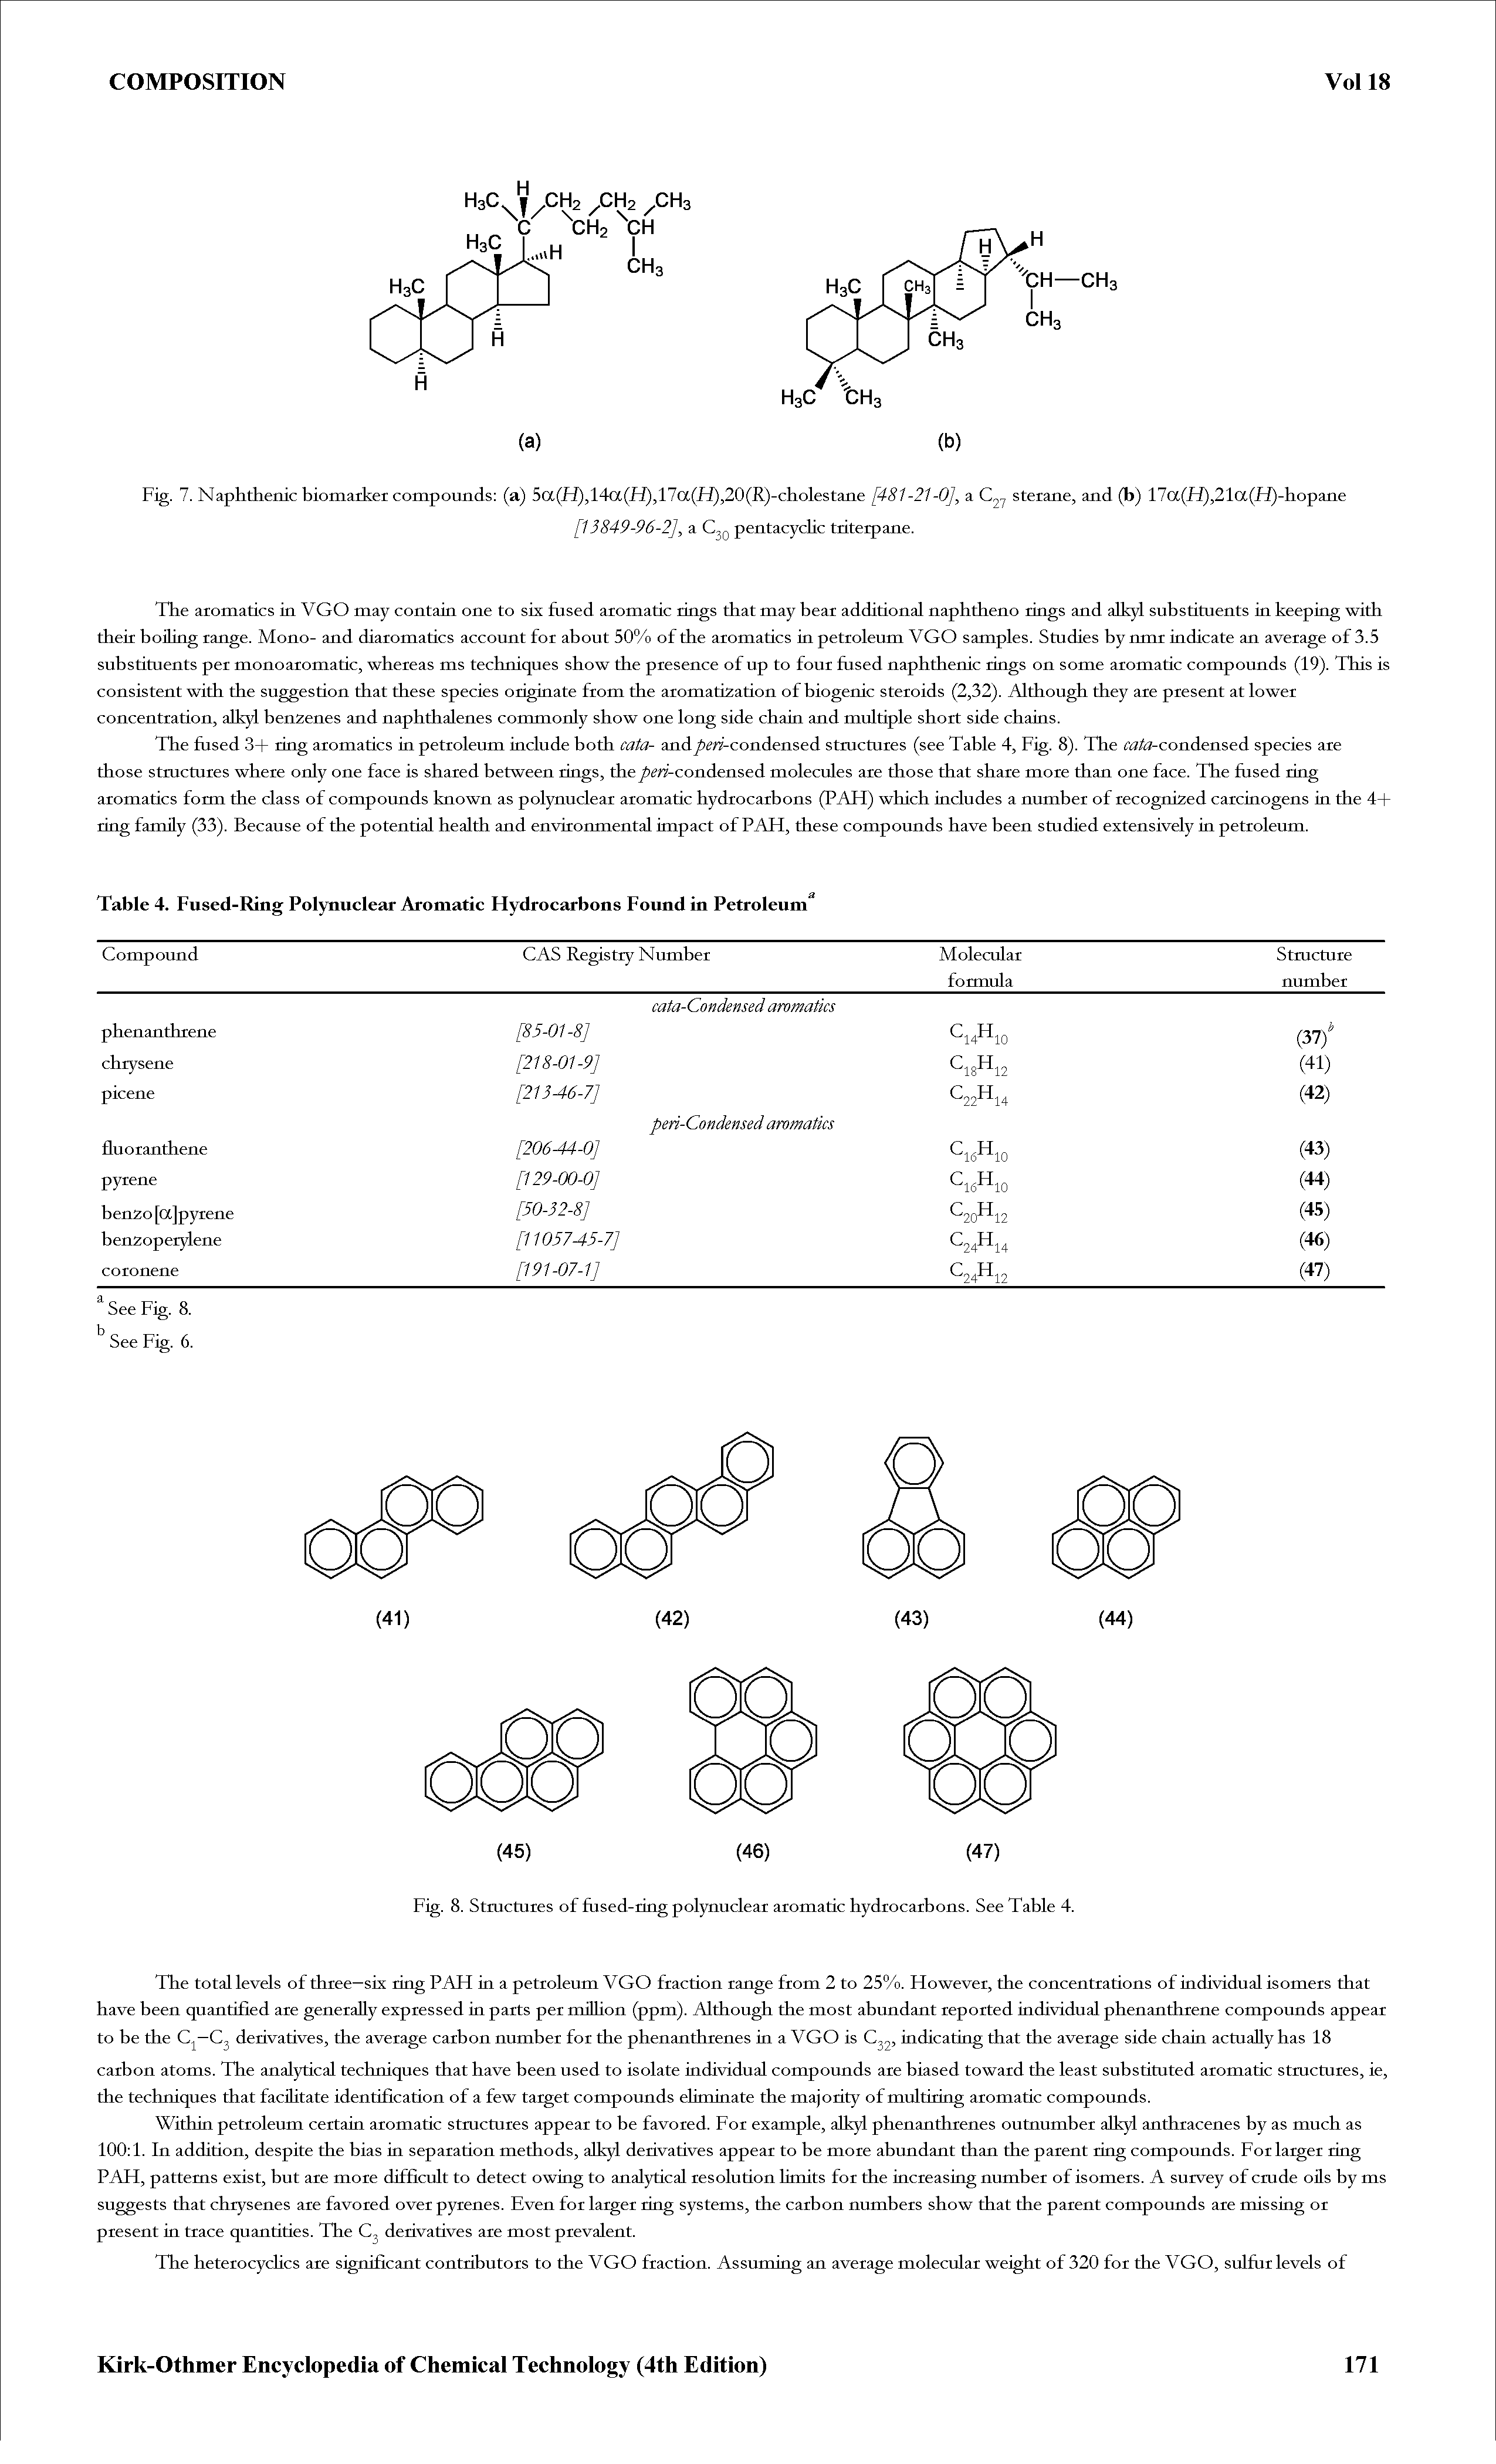 Fig. 8. Stmctures of fused-ring polynuclear aromatic hydrocarbons. See Table 4.